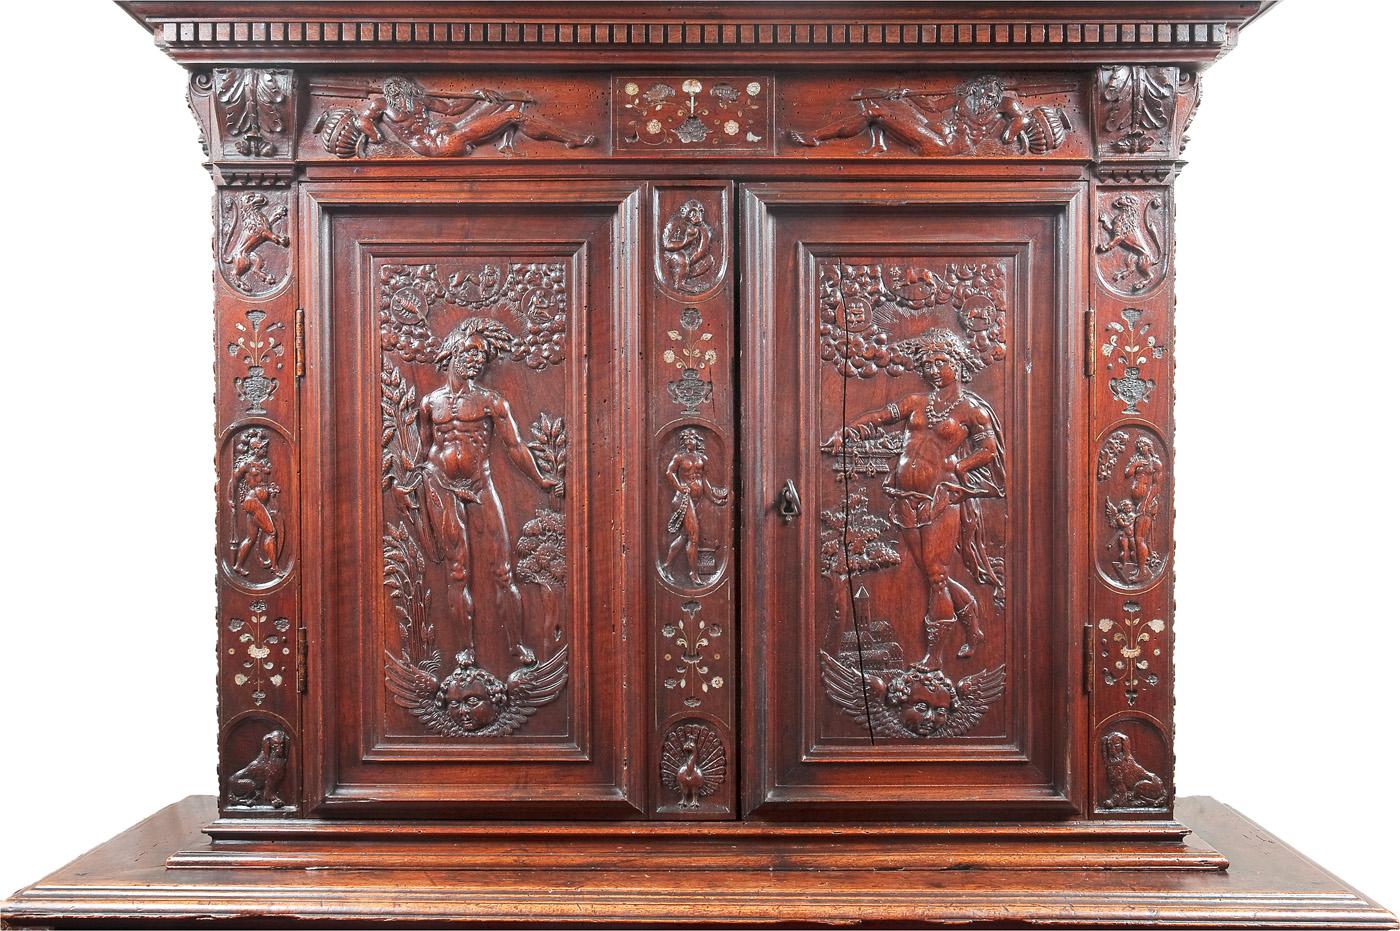 This rare Renaissance cabinet is richly decorated on the doors and drawers with carvings depicting the four seasons, and on the uprights and the entablature, alternating flower bouquets inlaid with mother of pearl. This is a beautifully conceived